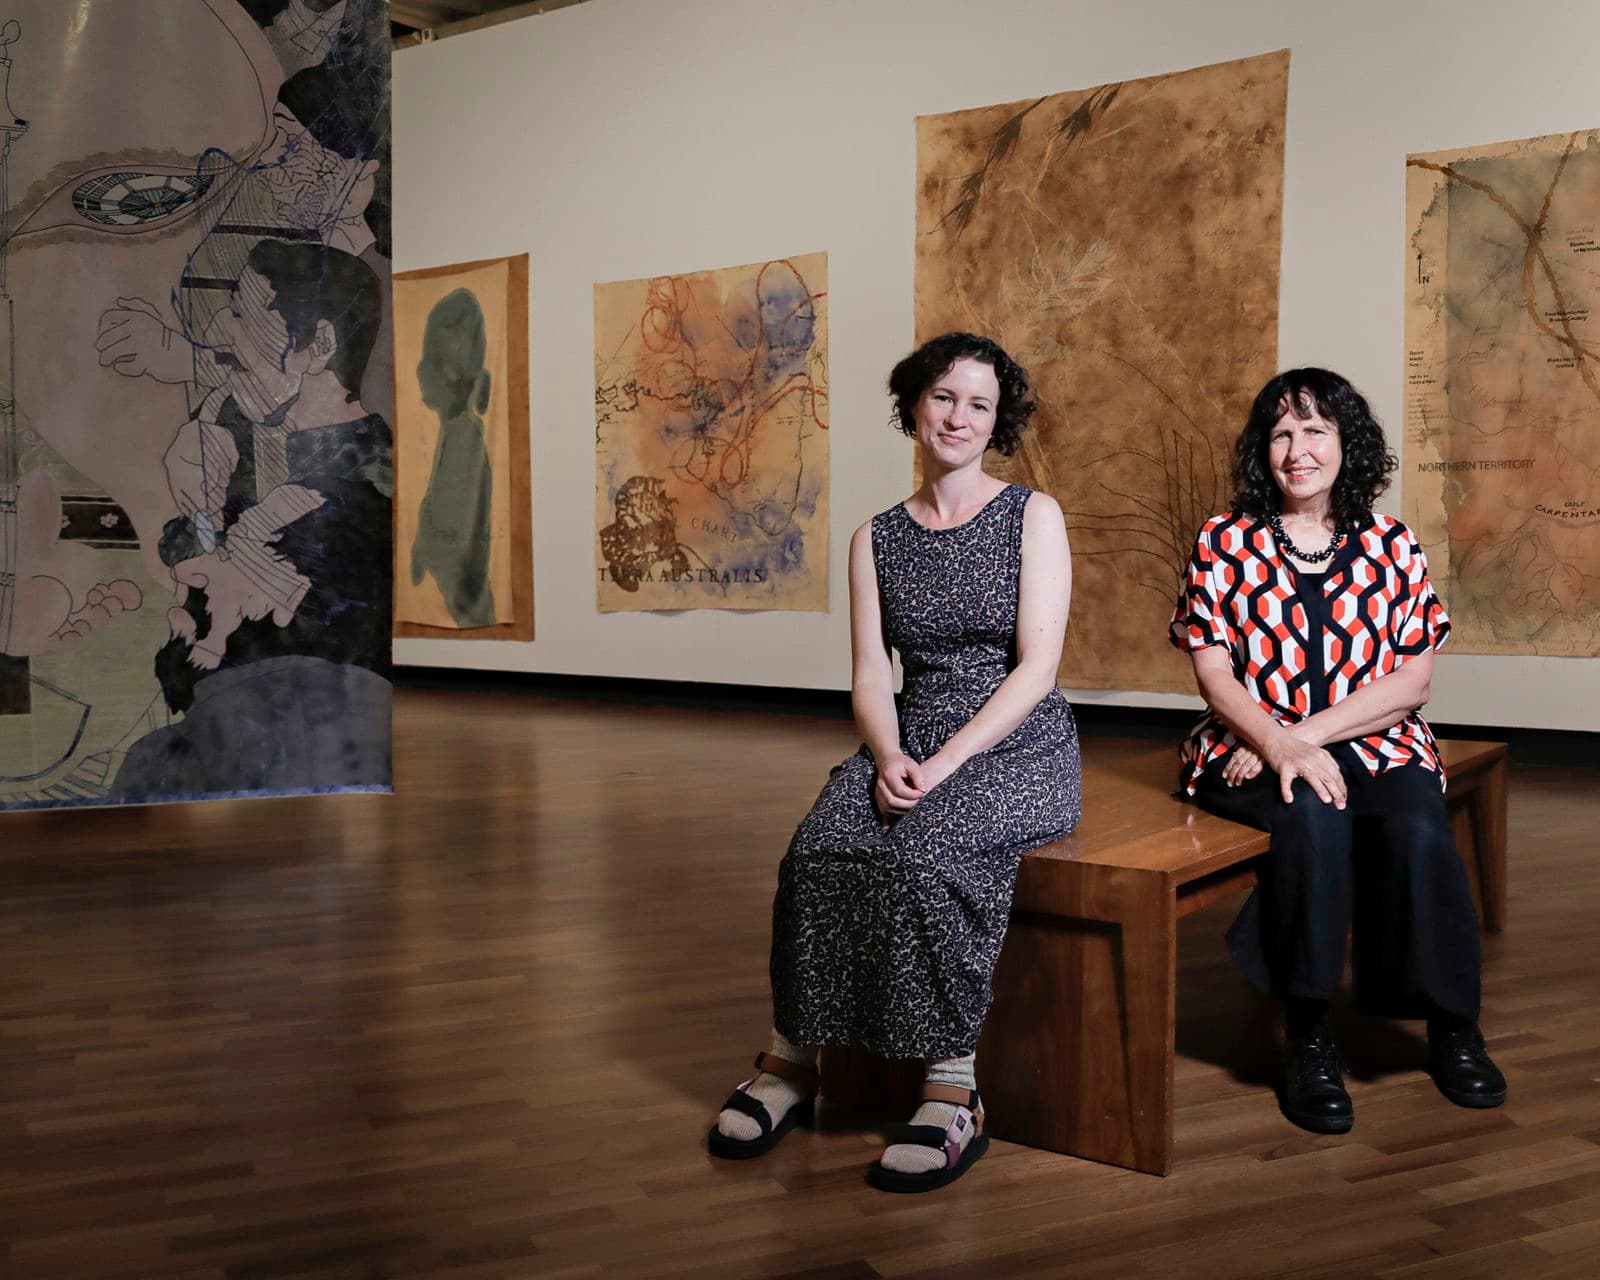 Two women sit on a timber bench, within a gallery space, surrounded by paintings and work of art suspended from the ceiling and walls